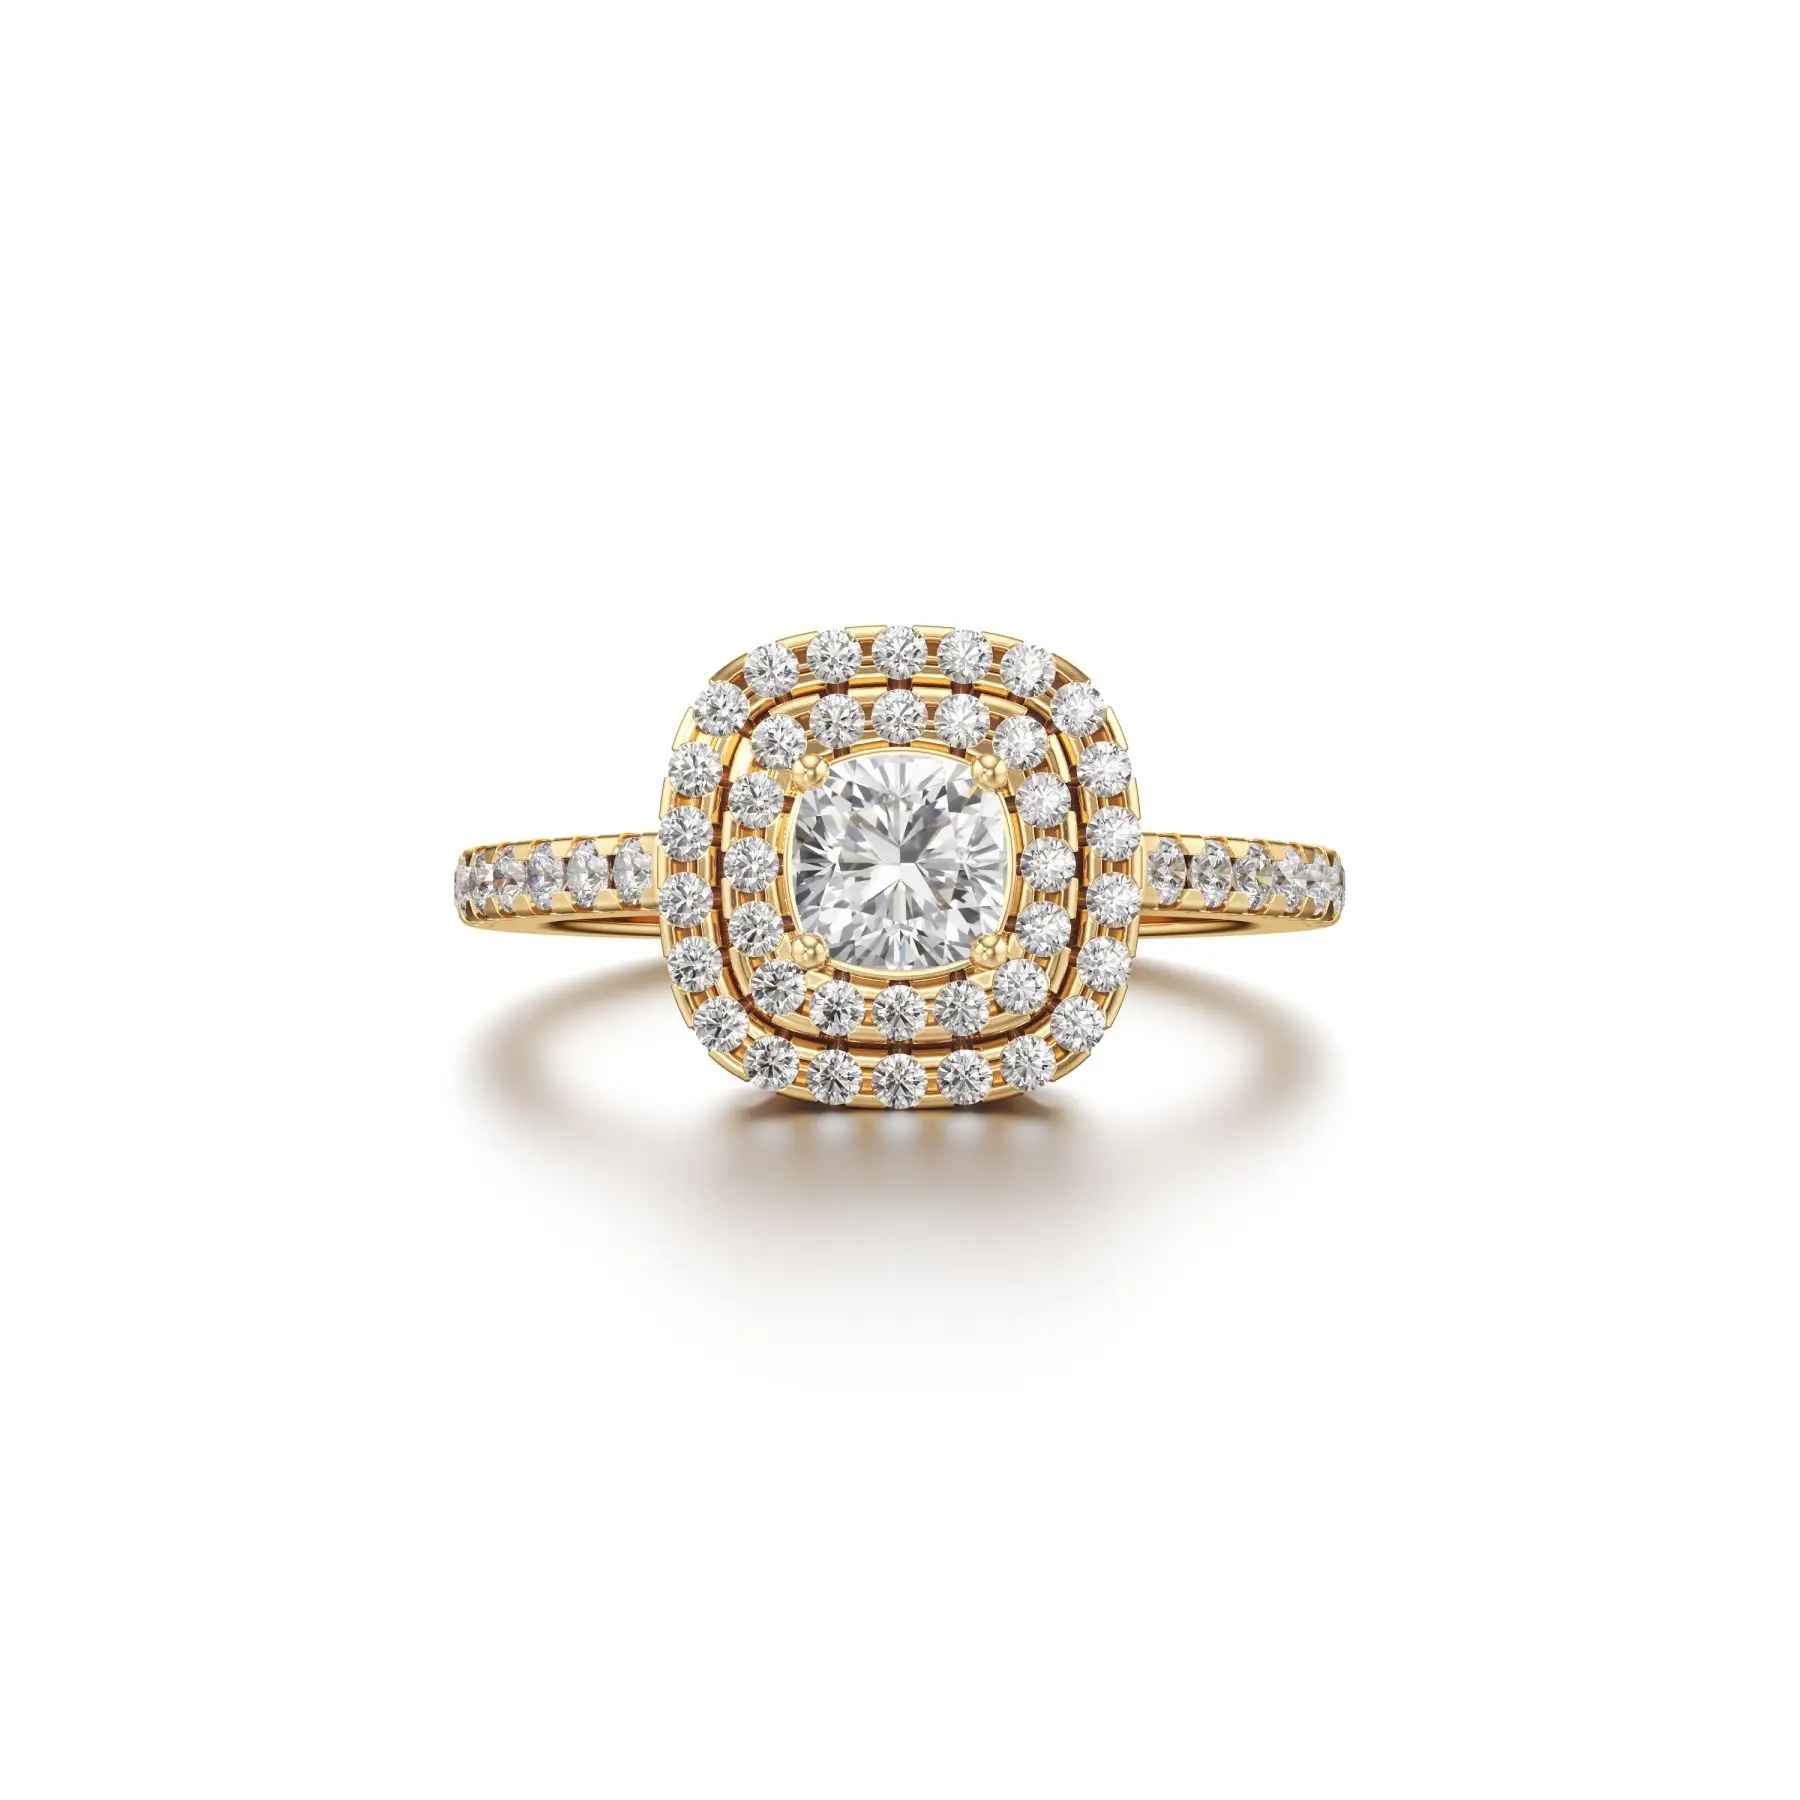 Solitaire Squircle Diamond Ring in Yellow 10k Gold